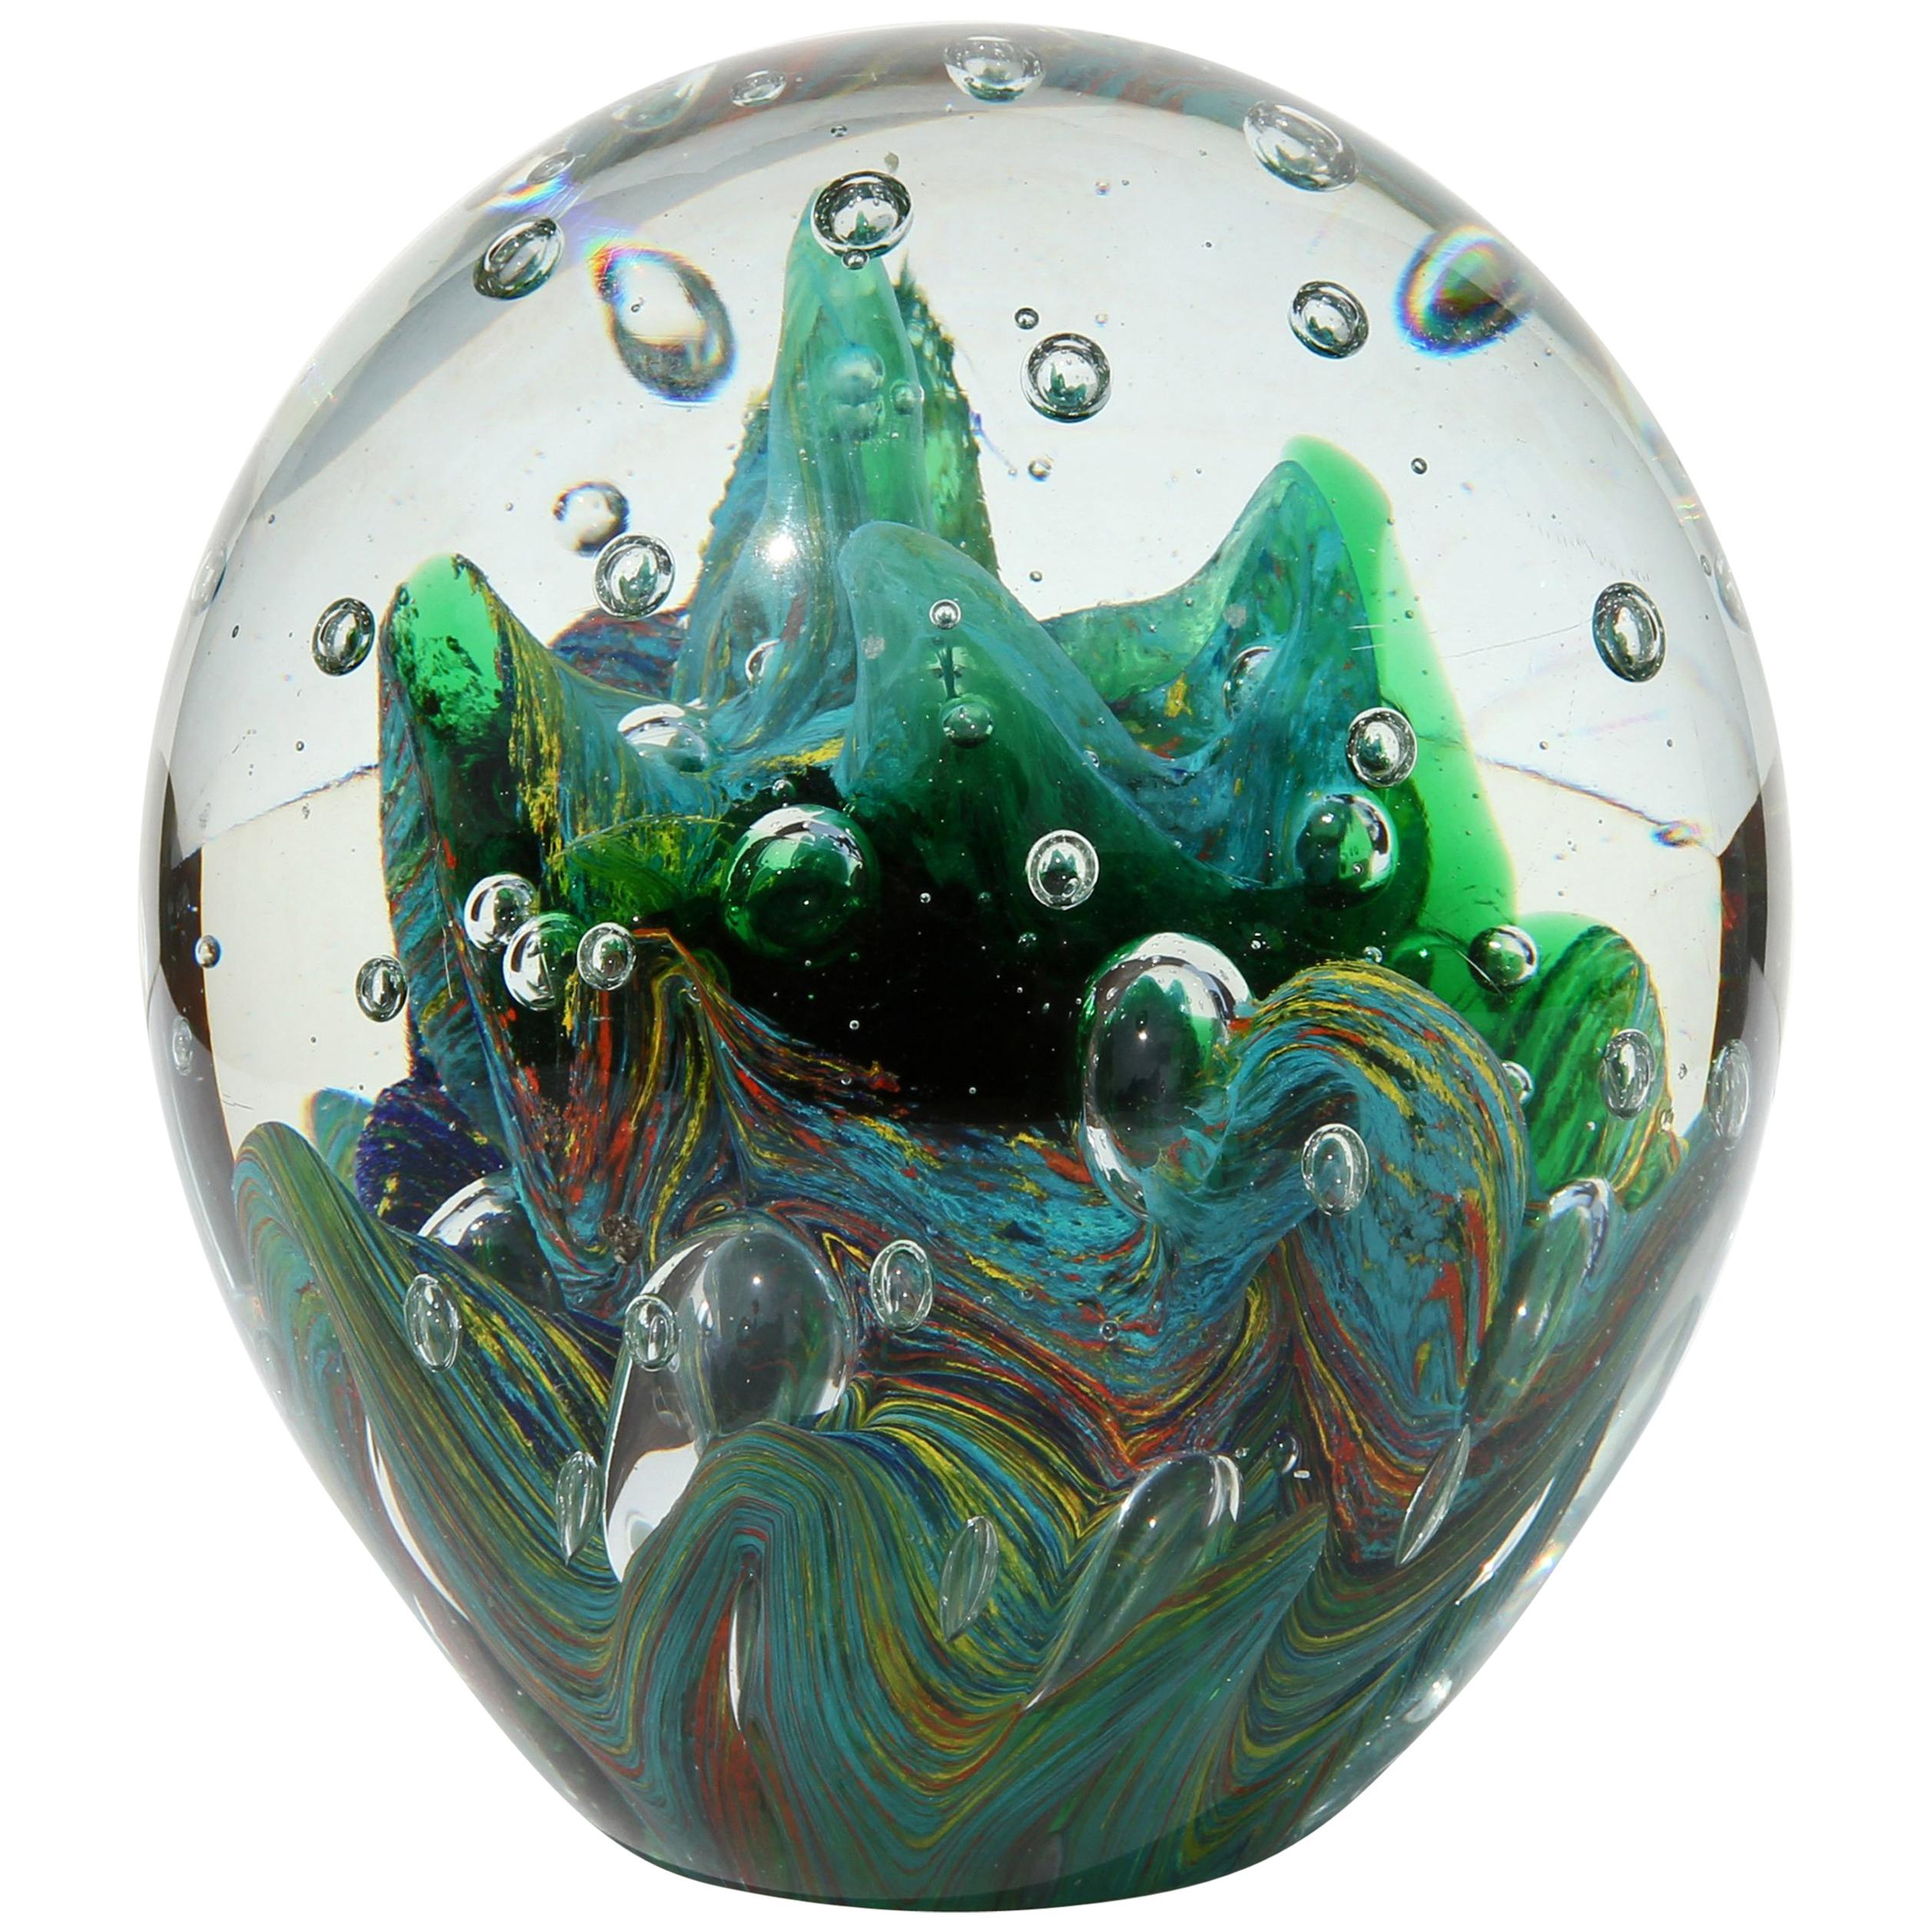 Large Murano Glass Paperweight with Internal Bubbles and Swirls